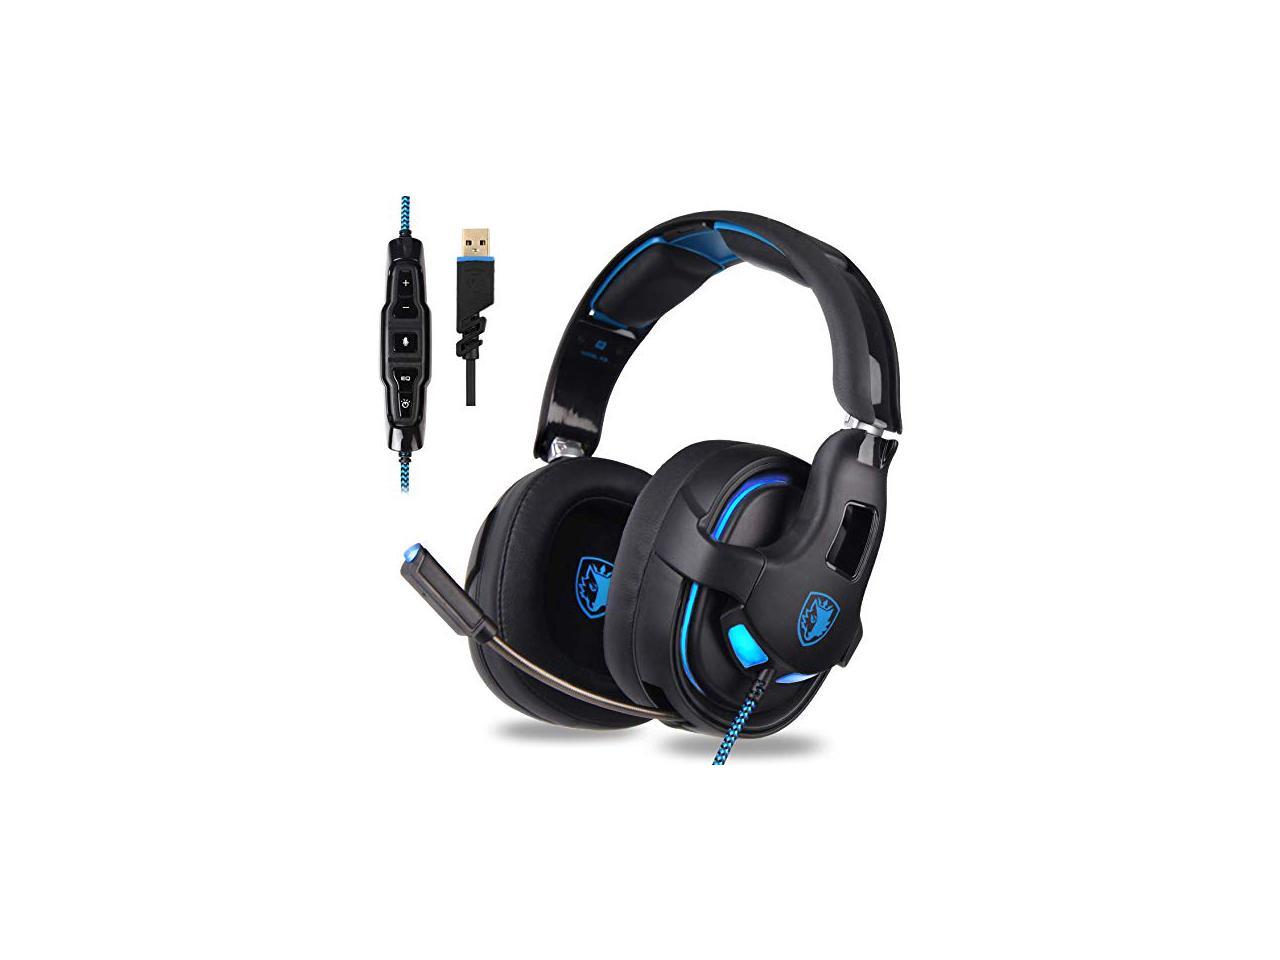 Sades R15 Gaming Headset 7.1 Surround Stereo Sound USB Gaming Headphone 53mm Drivers with Mic for PC Smartphone